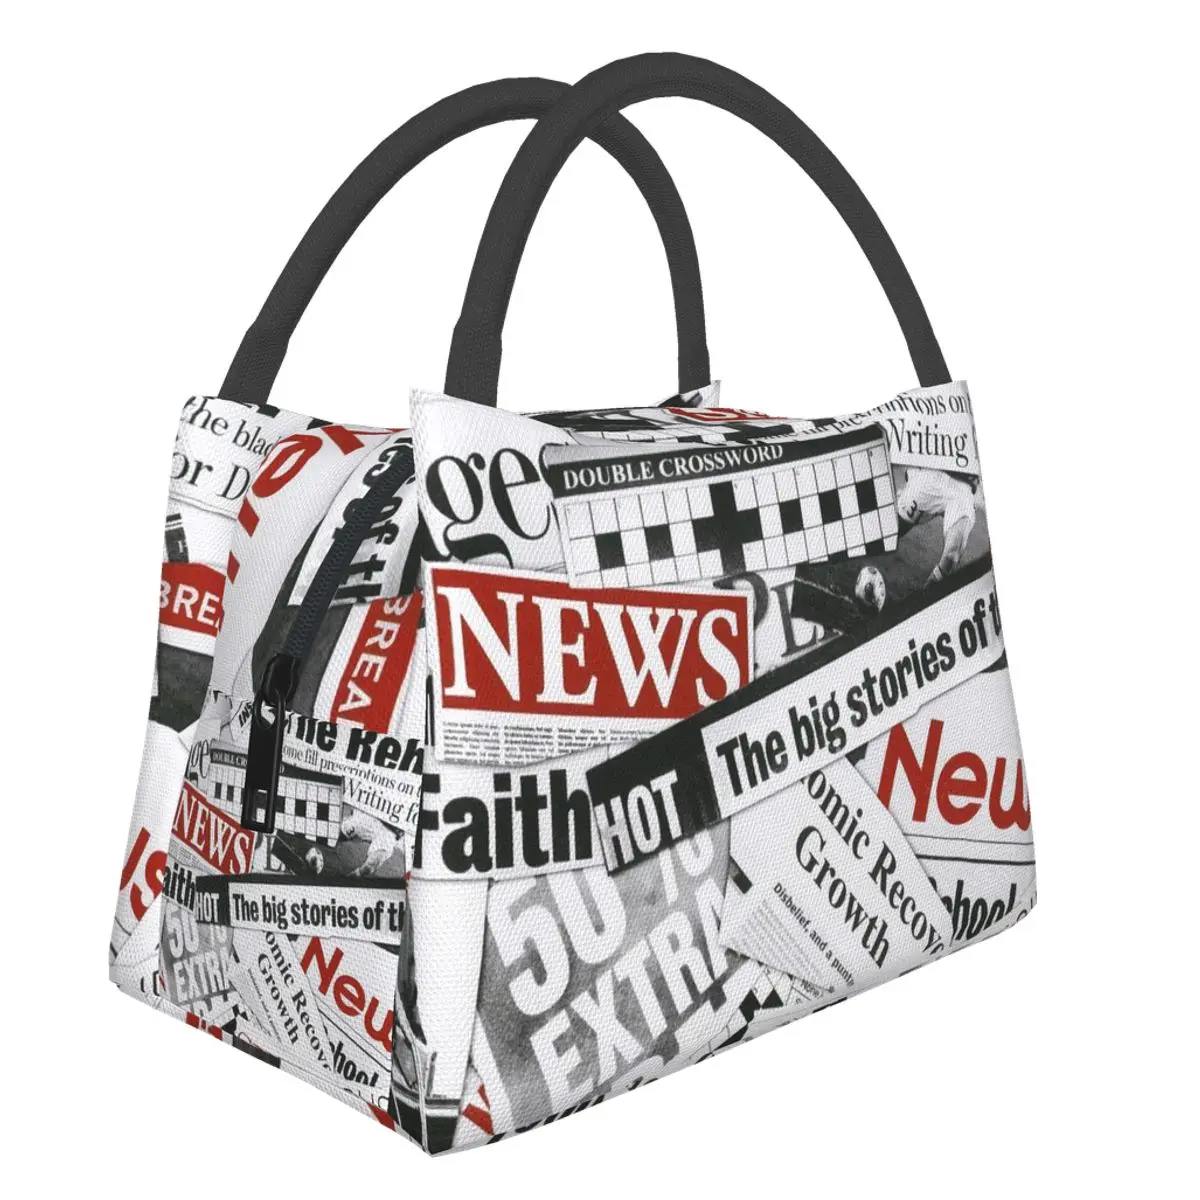 Portable Lunch Bag Newspaper Pattern Print Thermal Insulated Lunch Box Tote Cooler Handbag Bento Dinner Container School Storage portable insulated heat lunch bag waterproof oxford cloth picnic bento food thermal cooler tote bag handbag storage container